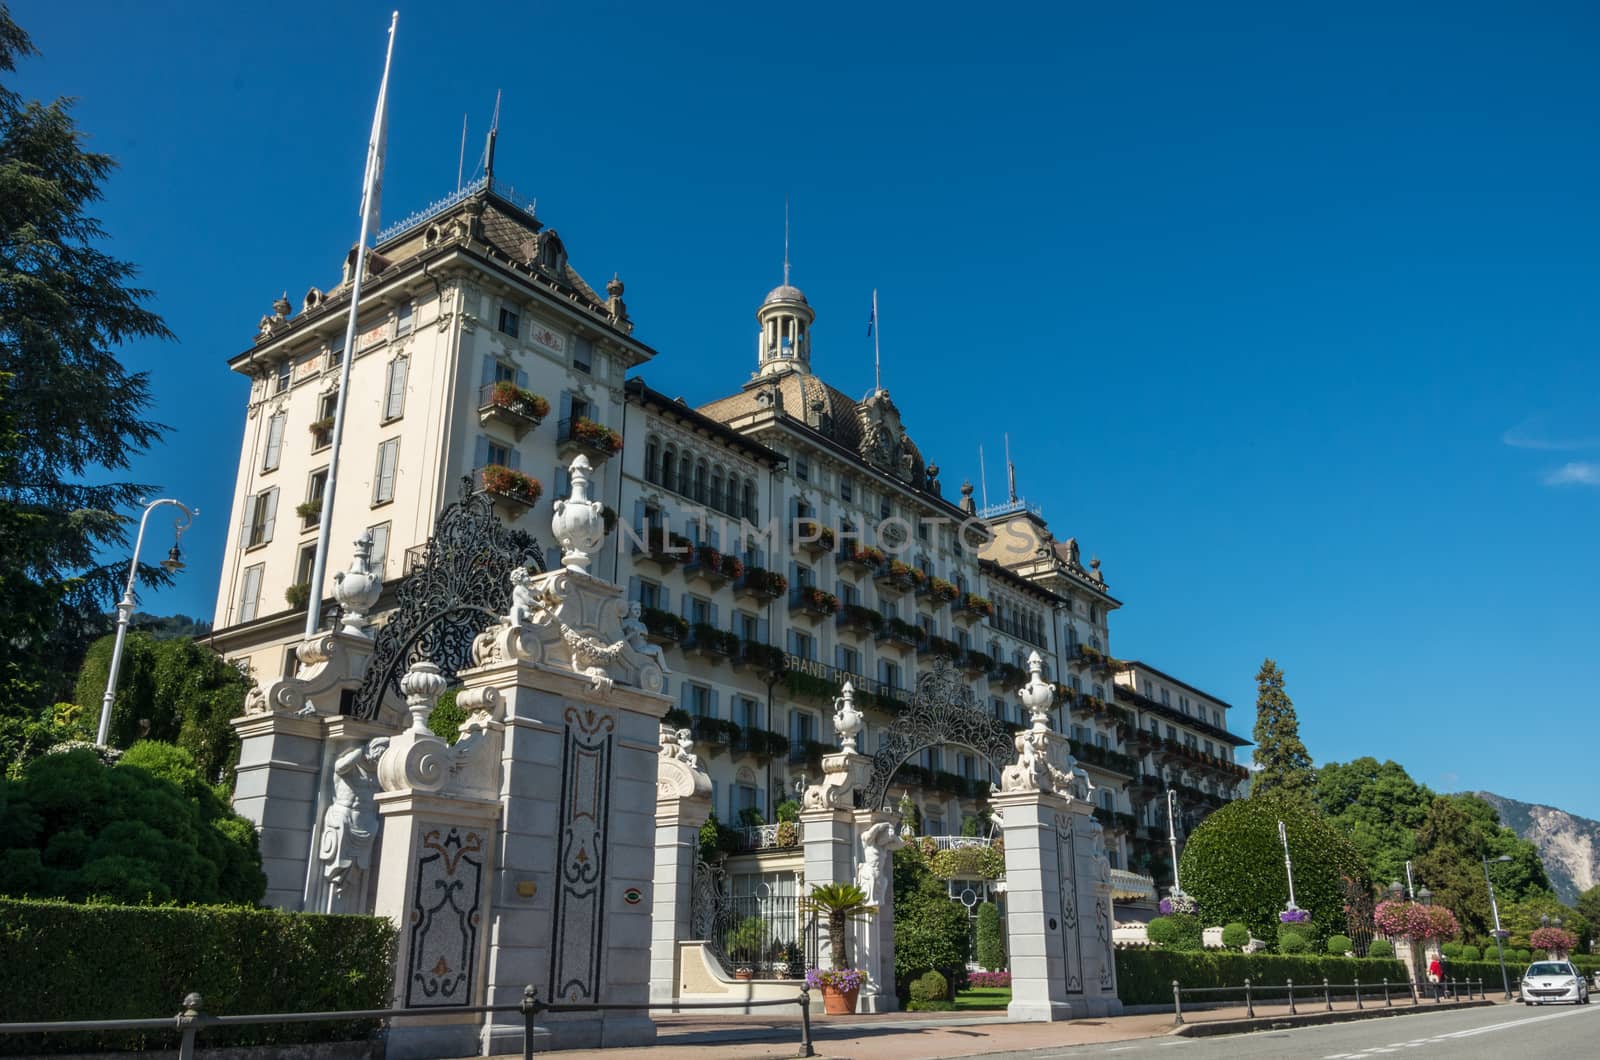 Grand Hotel Des Iles Borromees and Stresa town embankment, view  by Smoke666